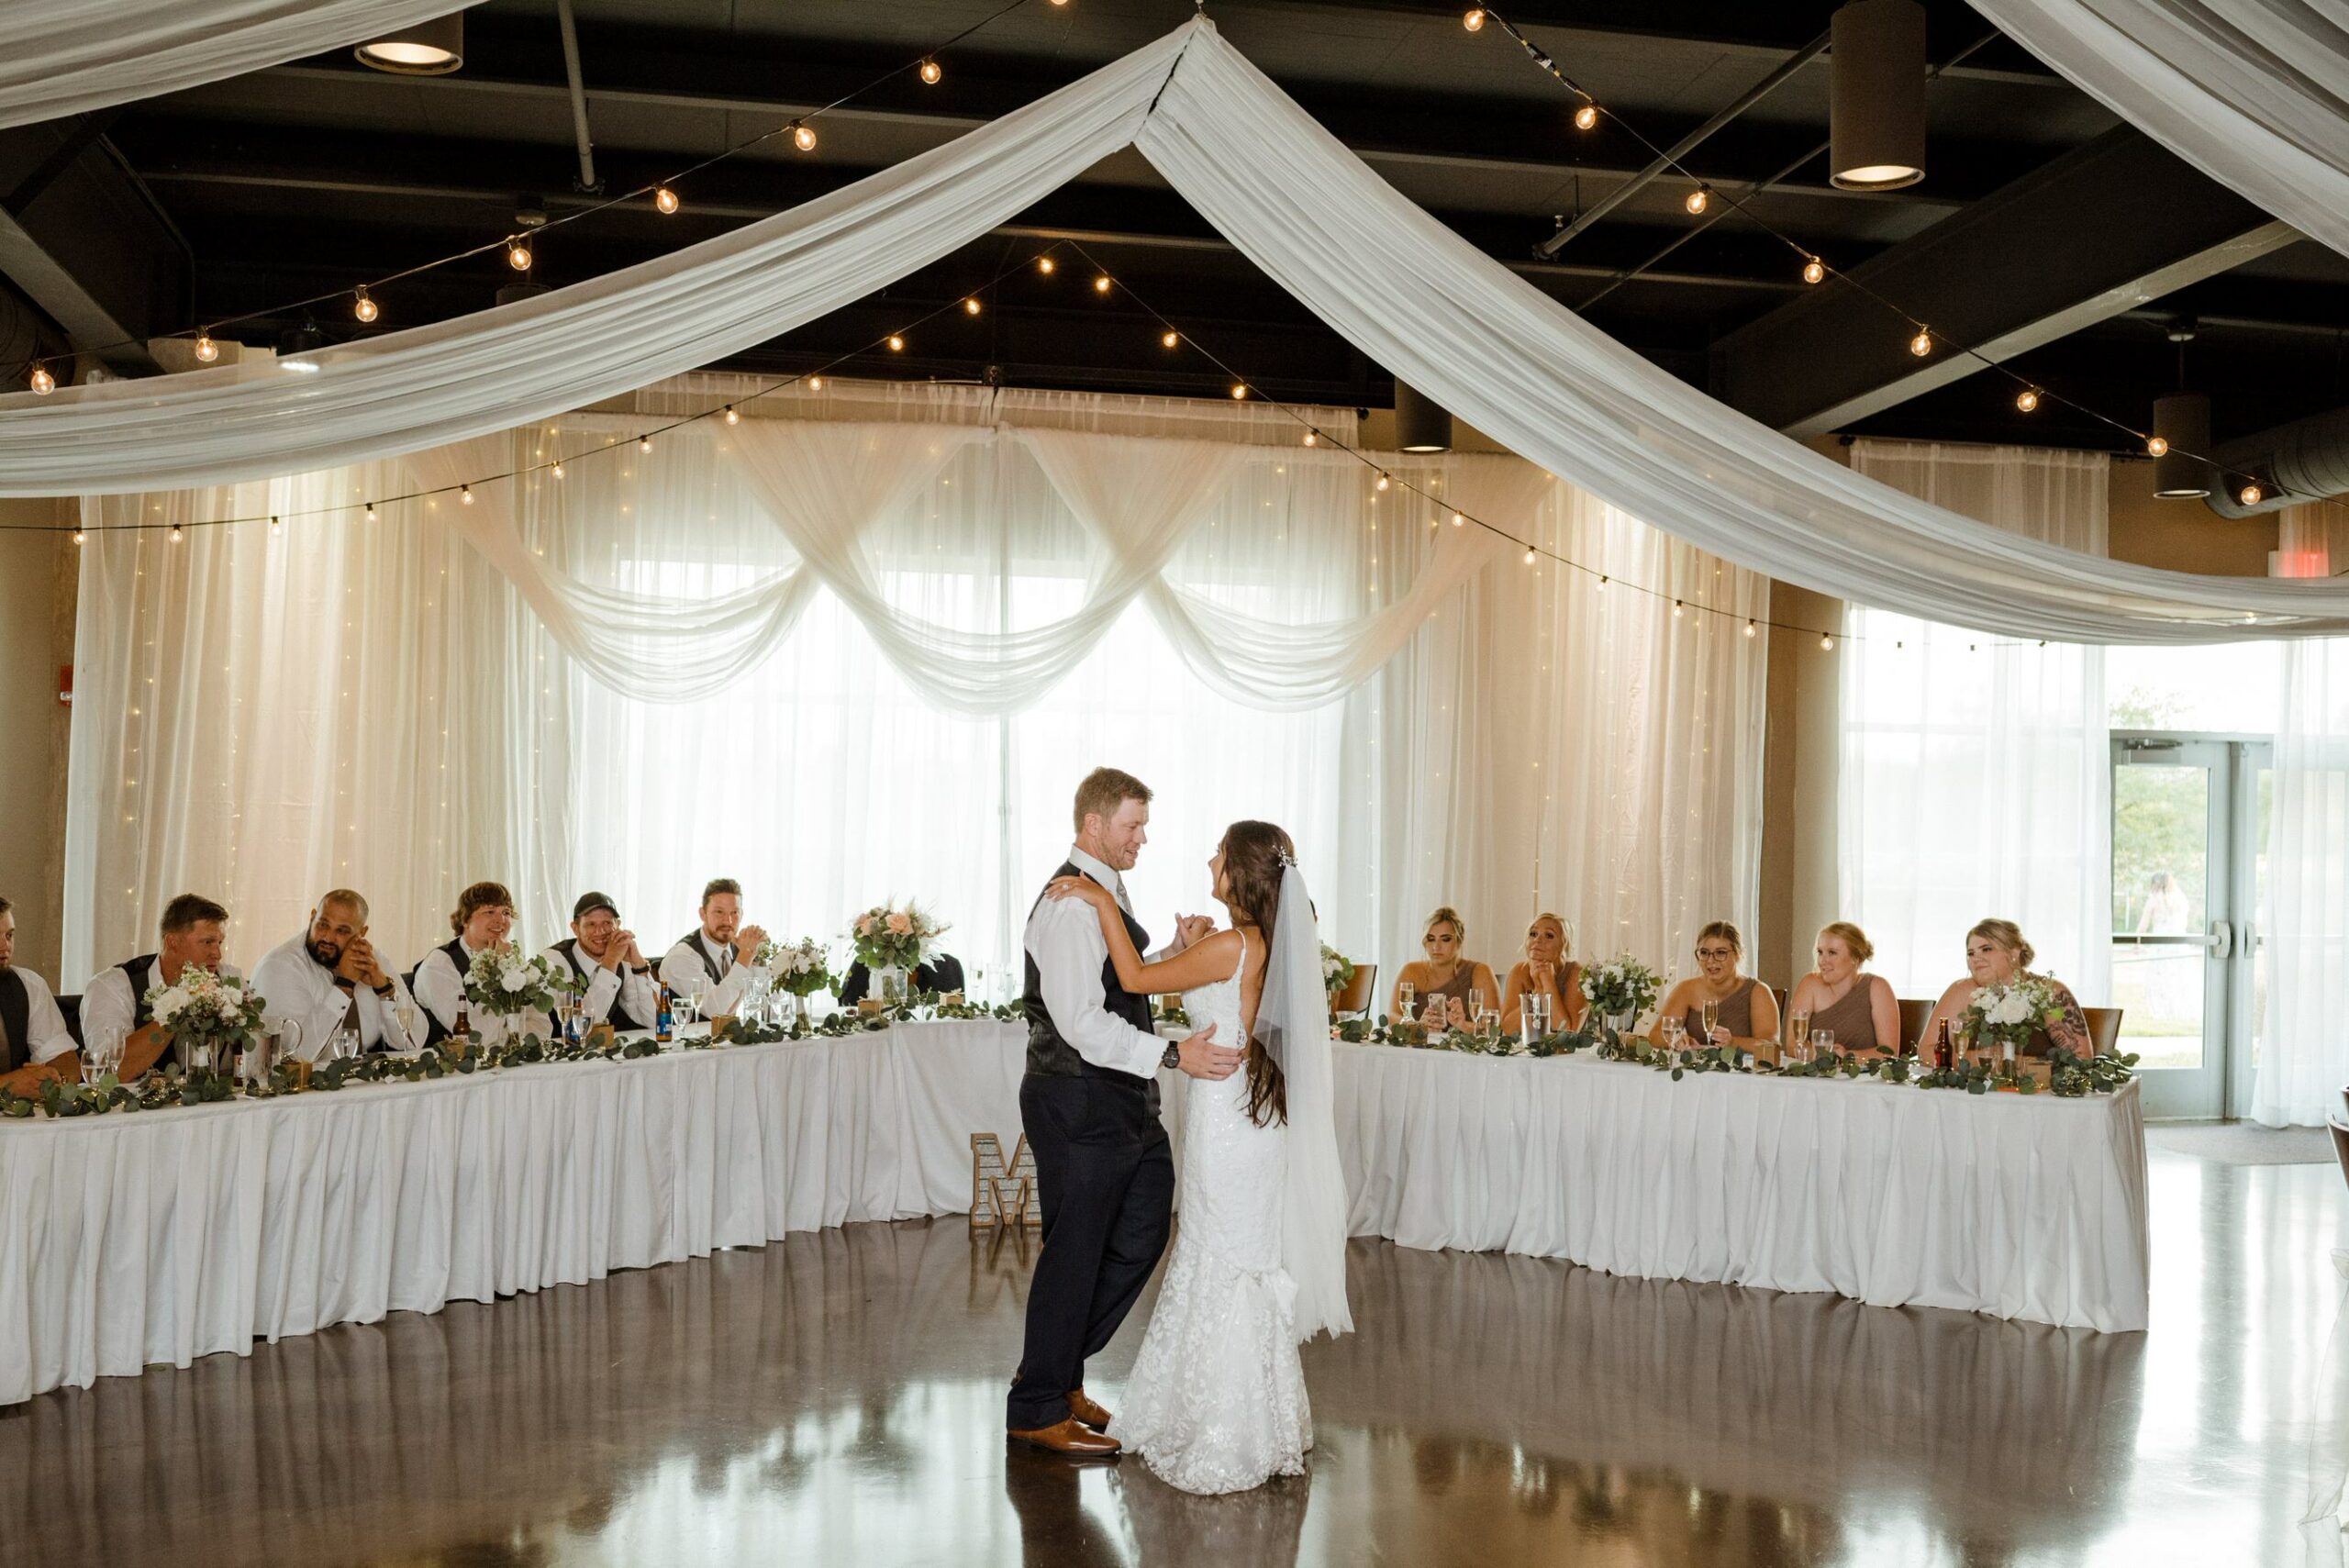 Ceiling and head table decor